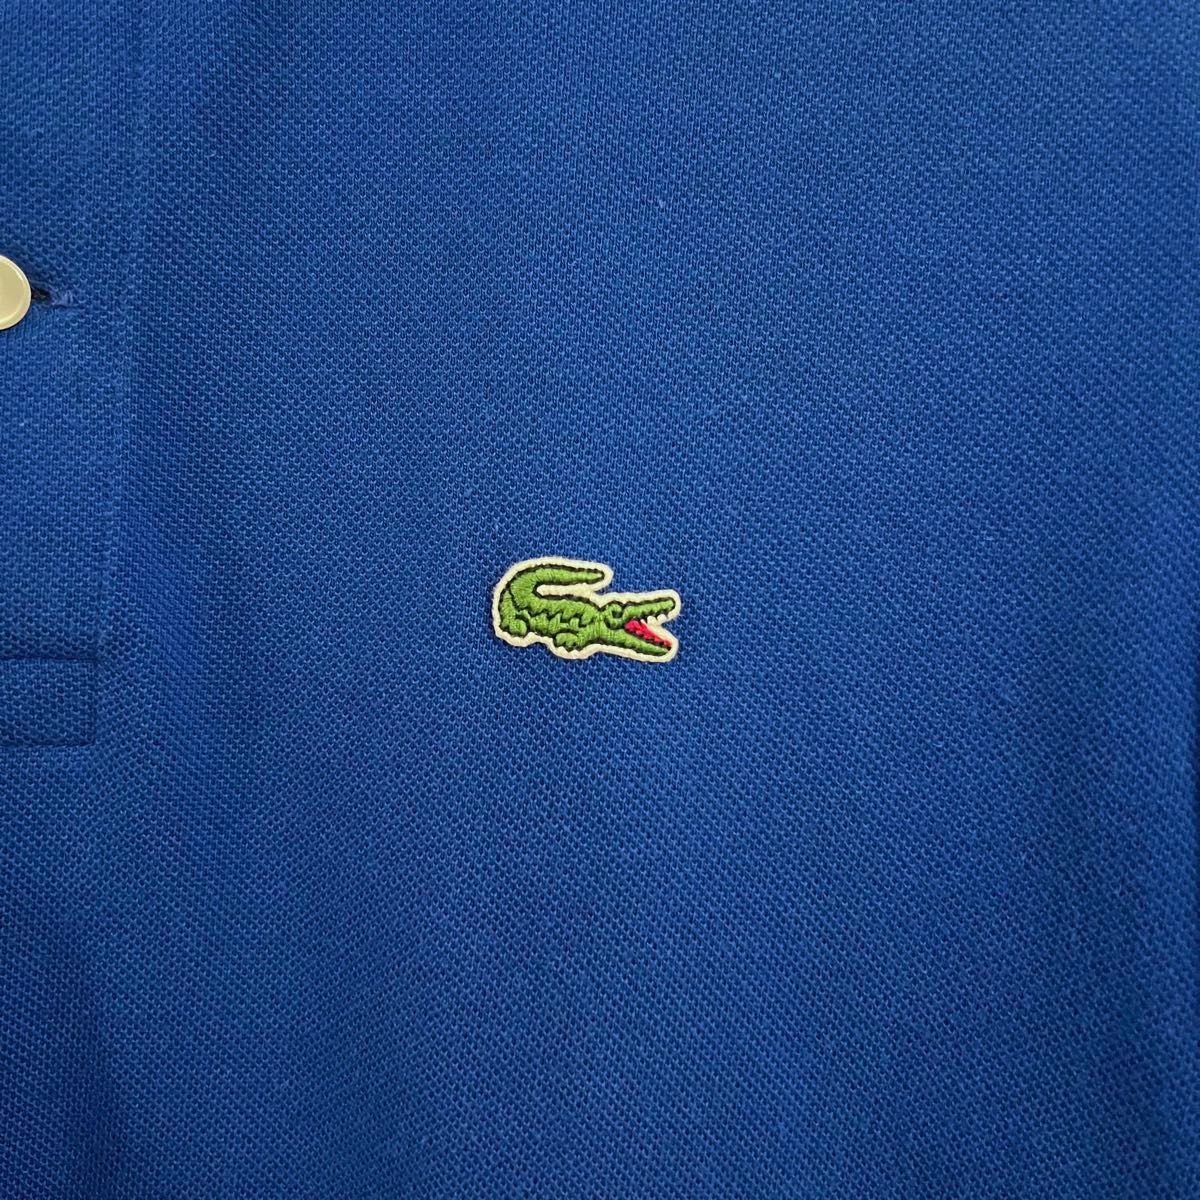 LACOSTE 半袖 ポロシャツ